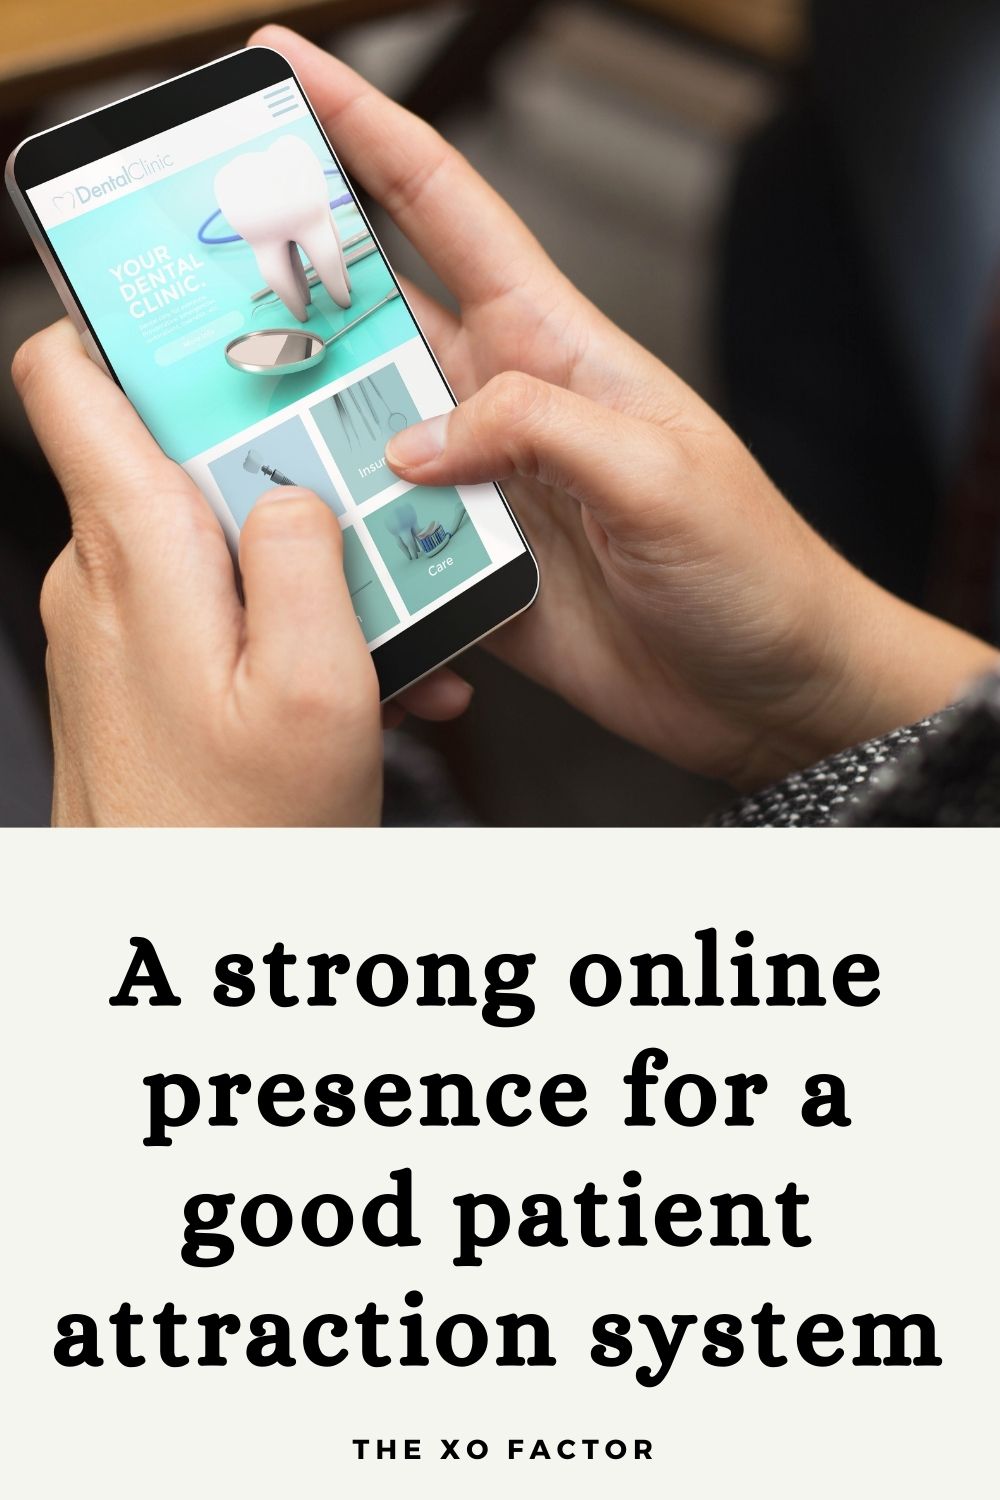 A strong online presence for a good patient attraction system